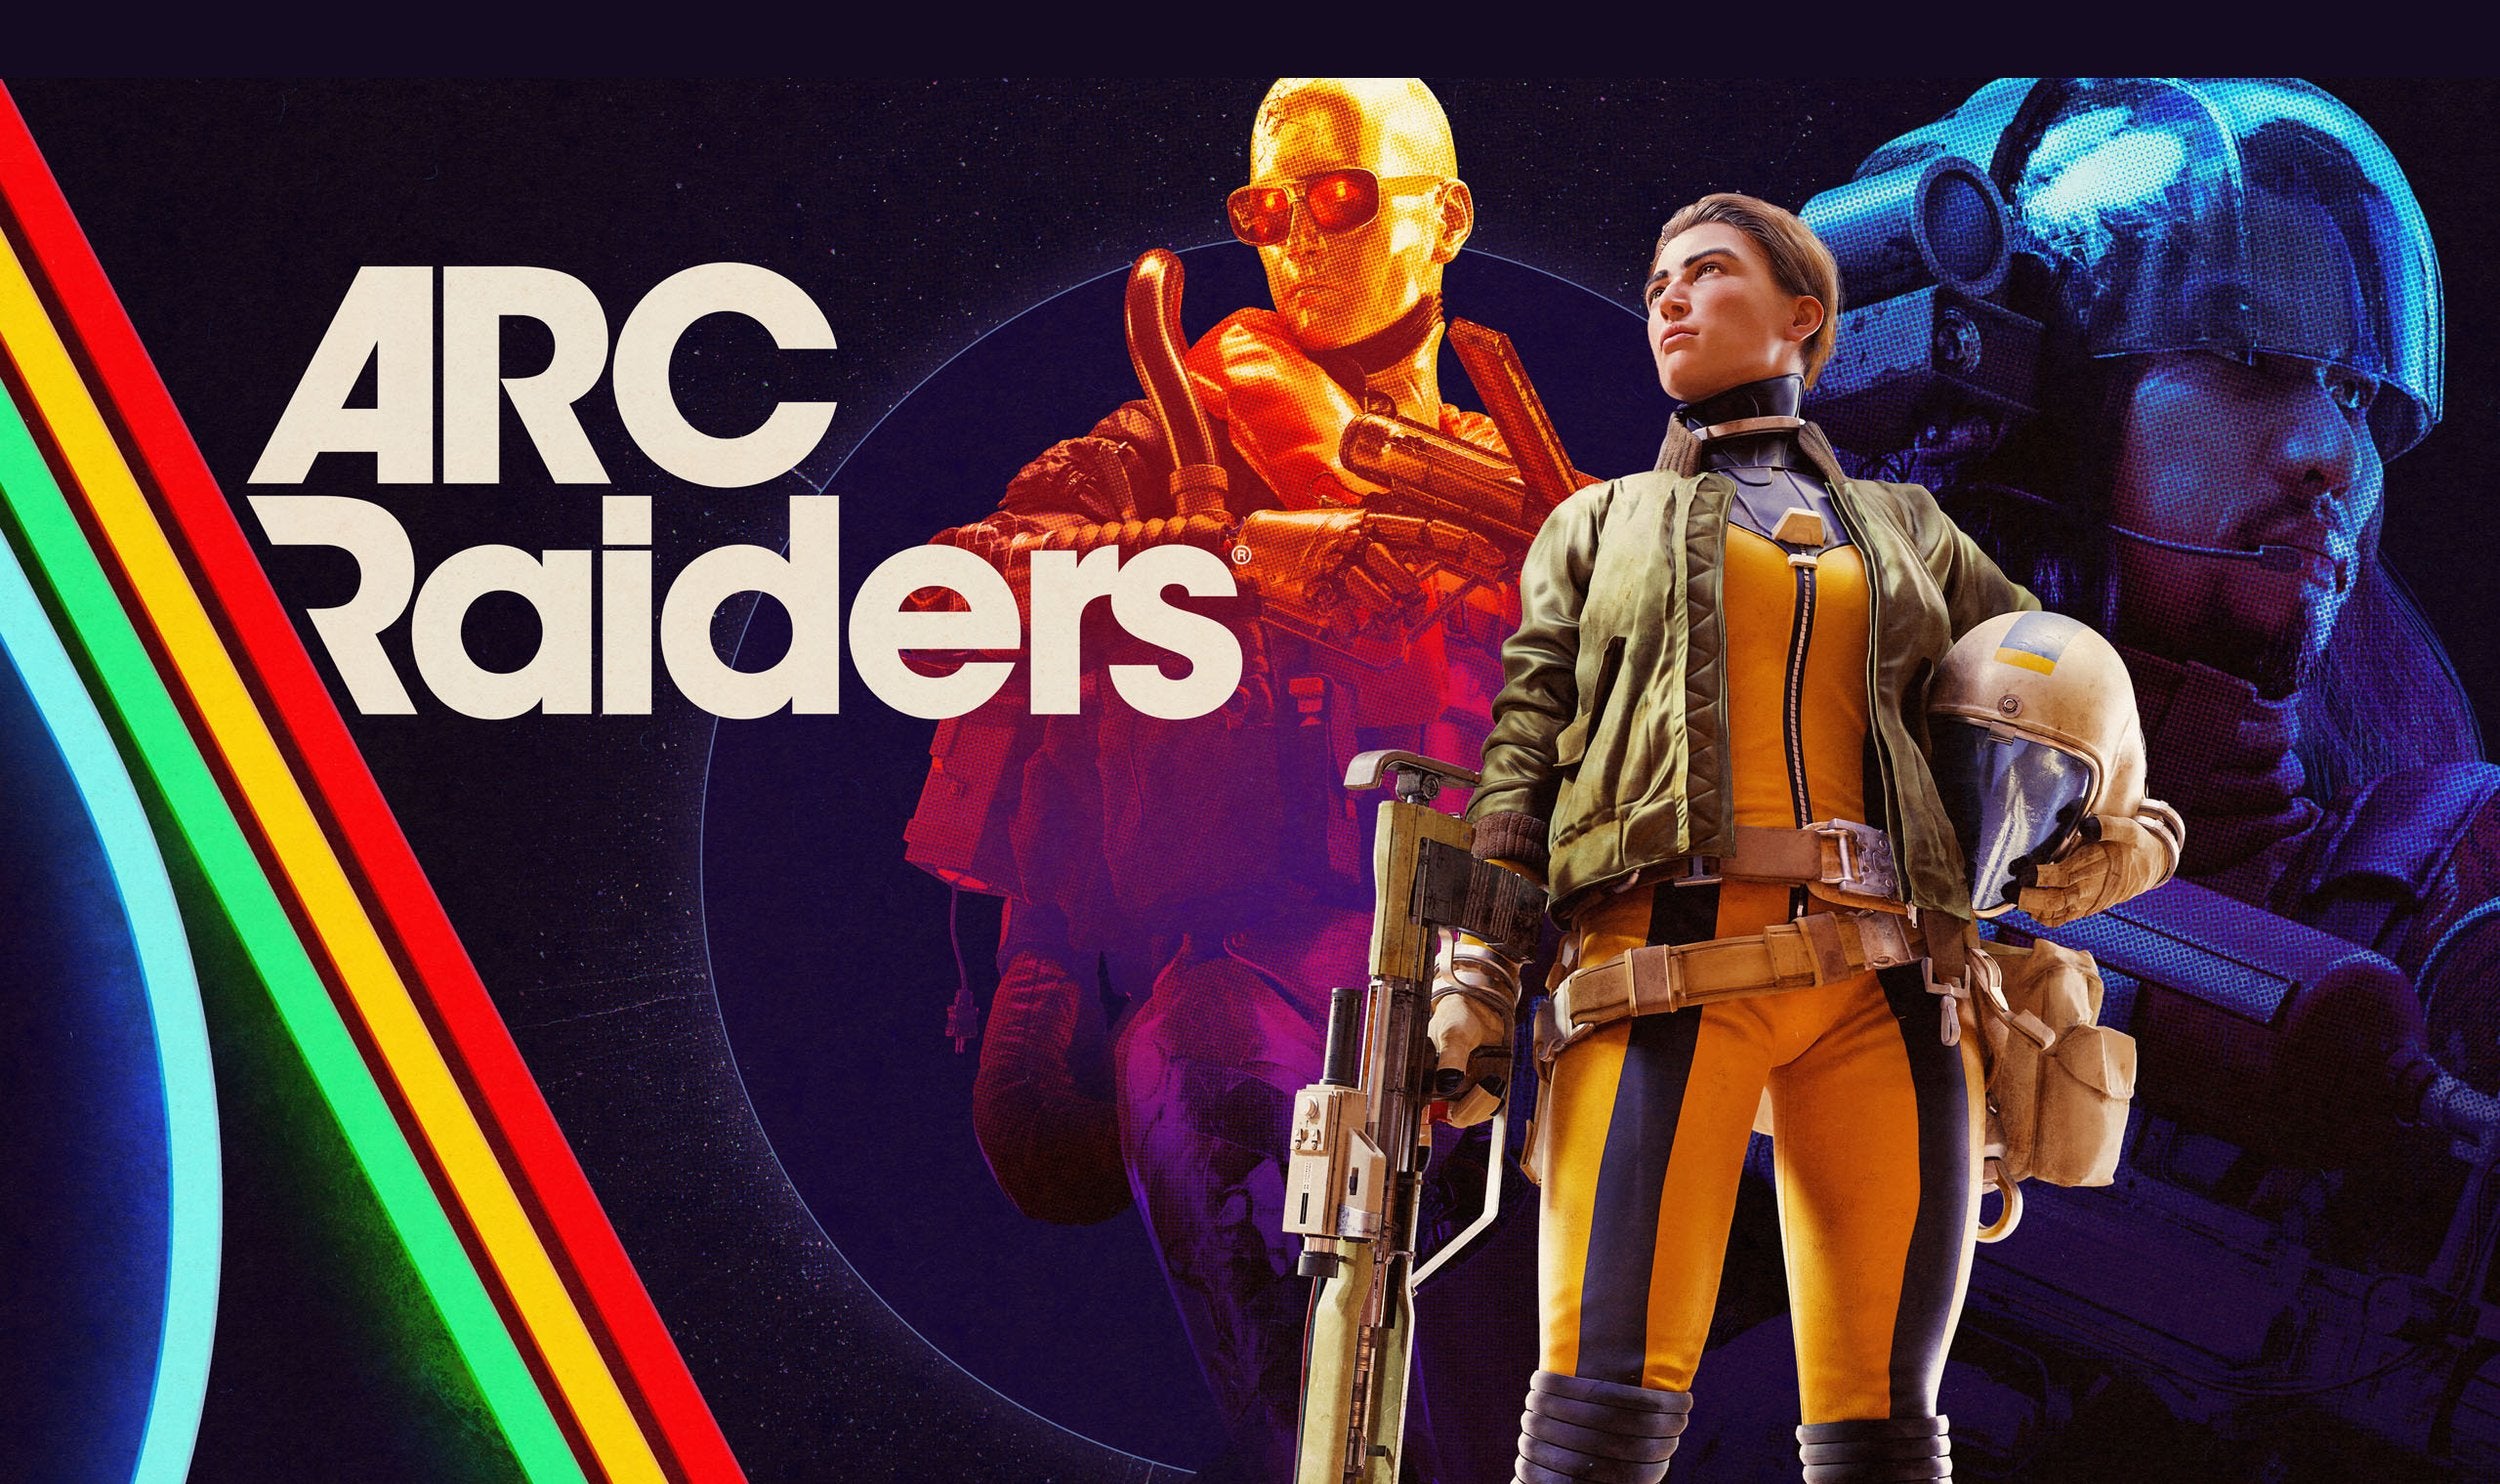 Image for ARC Raiders also won’t be coming in 2022